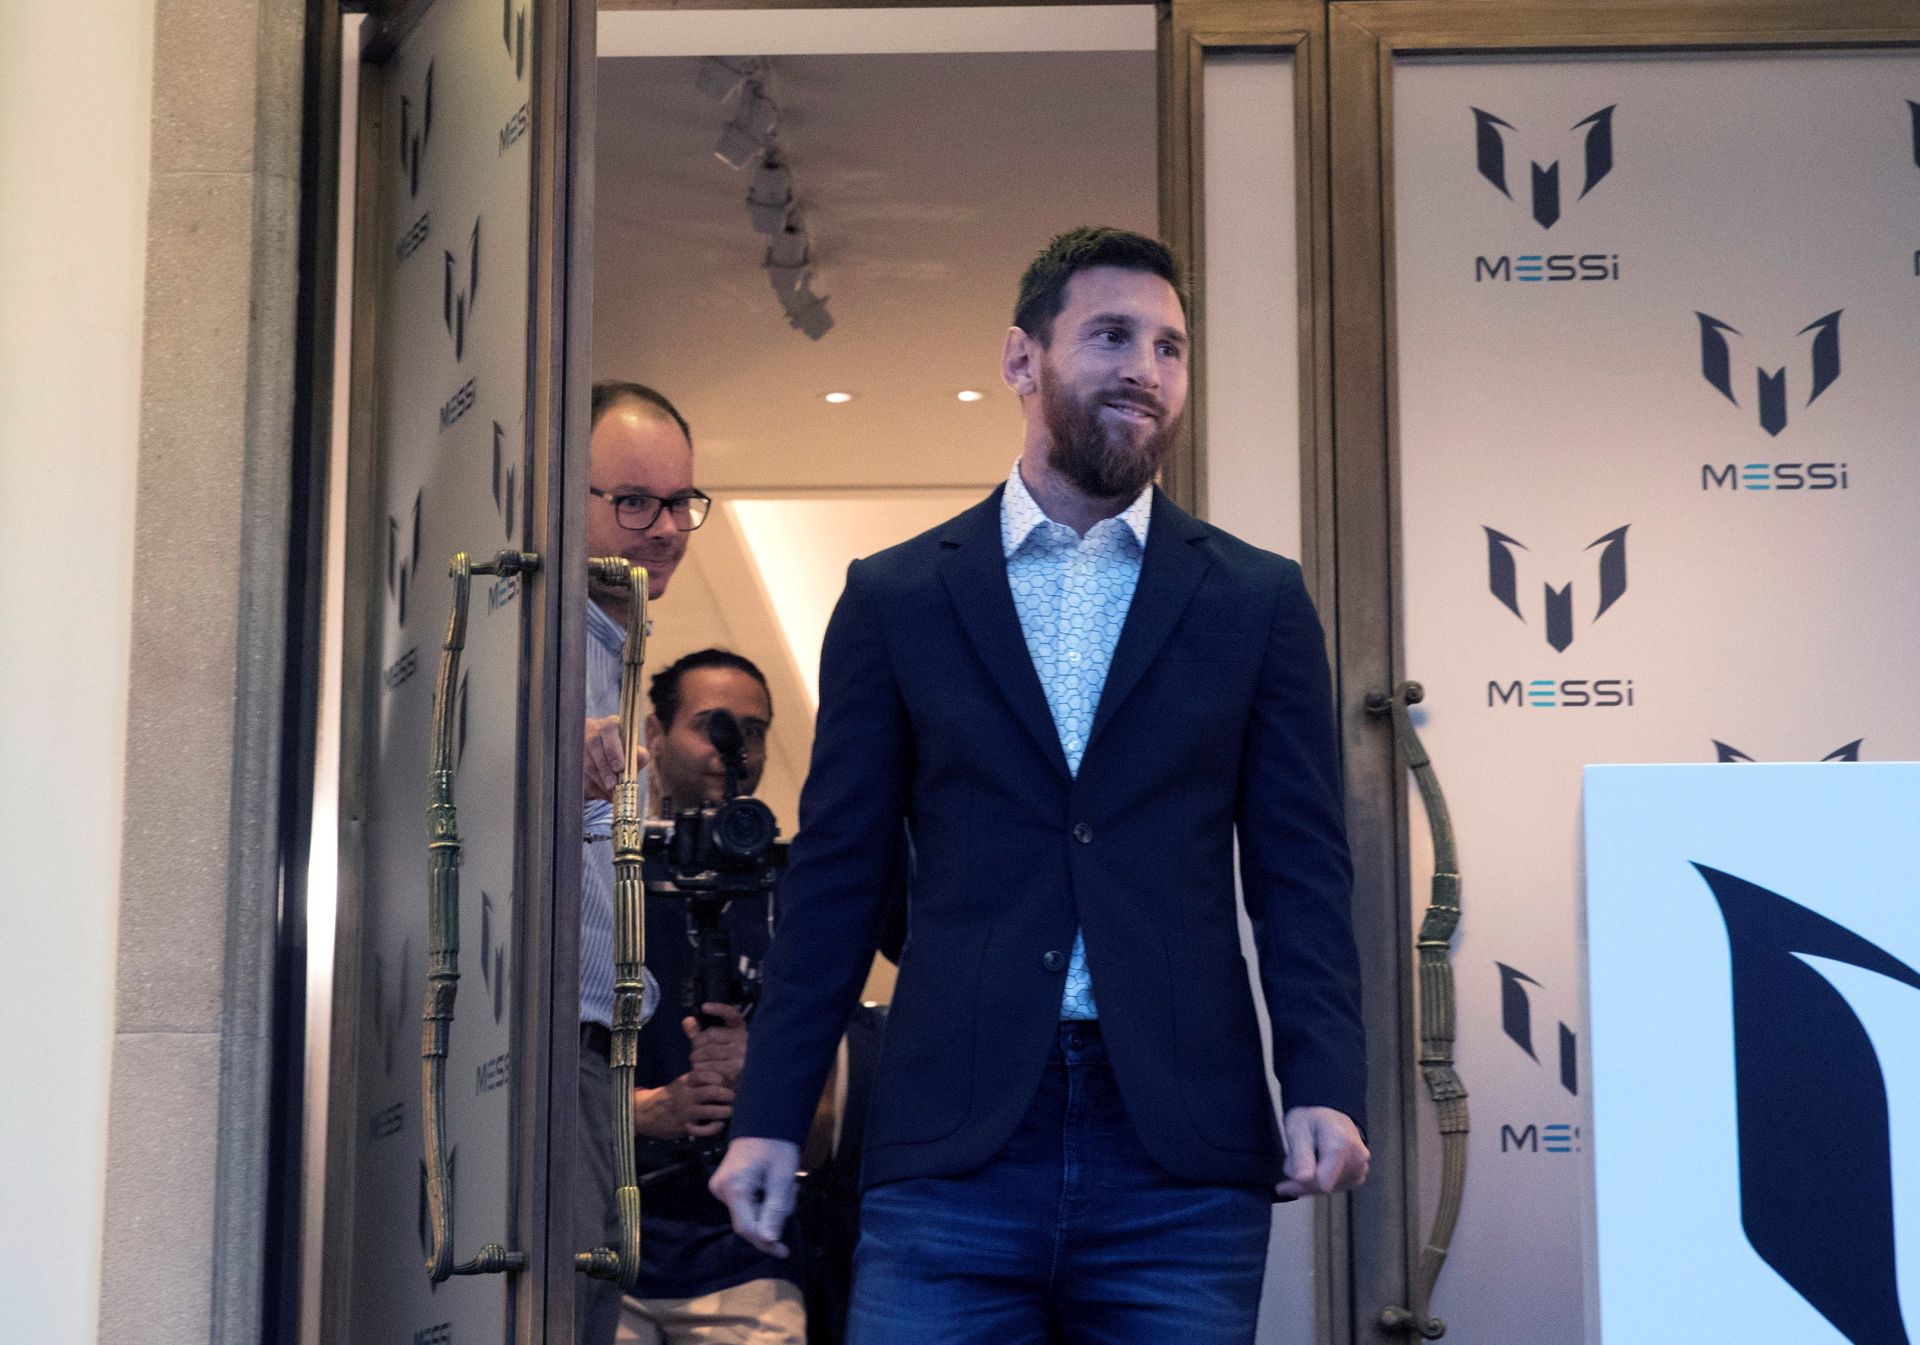 epa07854243 FC Barcelona's player Lionel Messi from Argentina presents his own clothes collection in Barcelona, Catalonia, Spain, 19 September 2019. The Leo Messi fashion collection has been designed by designer Virginia Hilfiger and his sister Maria Sol Messi.  EPA/Marta Perez